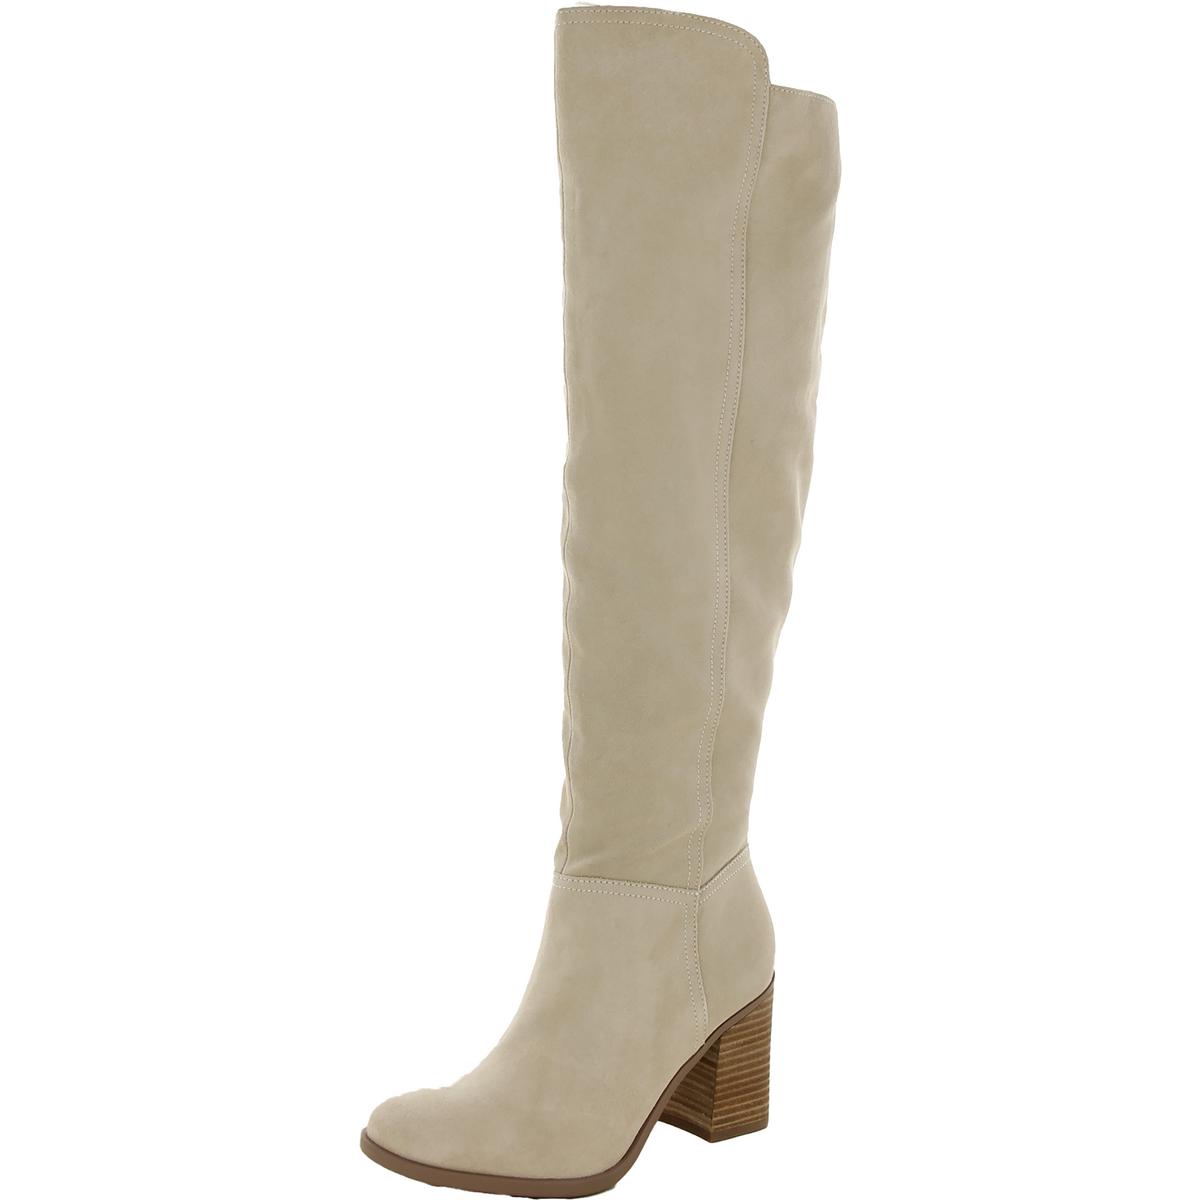 Pre-owned Naturalizer Womens Kyrie Suede Water Repellent Knee-high Boots Shoes Bhfo 1792 In Porcelain Suede